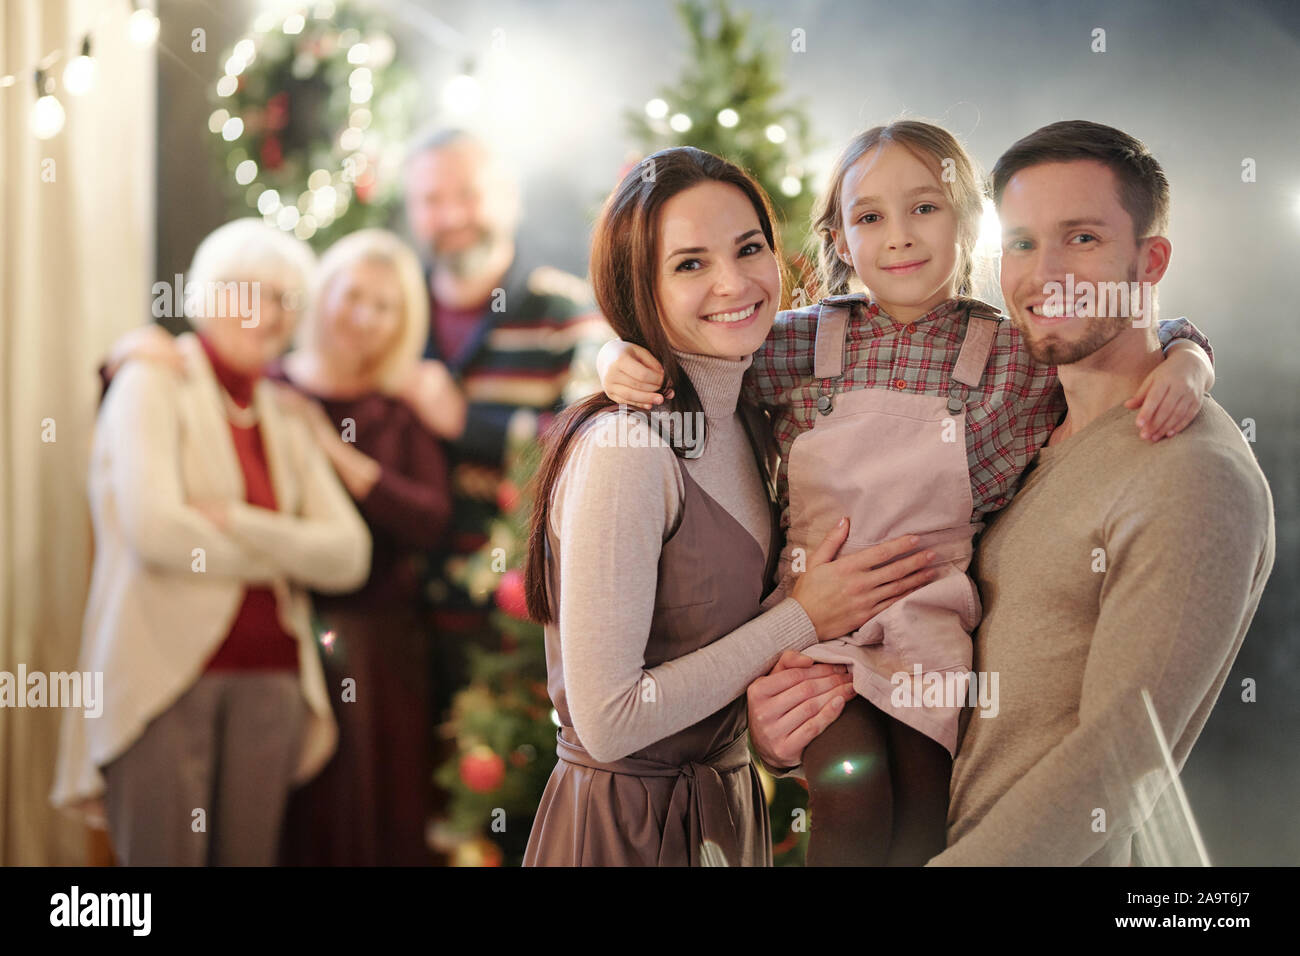 Happy young family standing in front of camera on background of mature adults Stock Photo